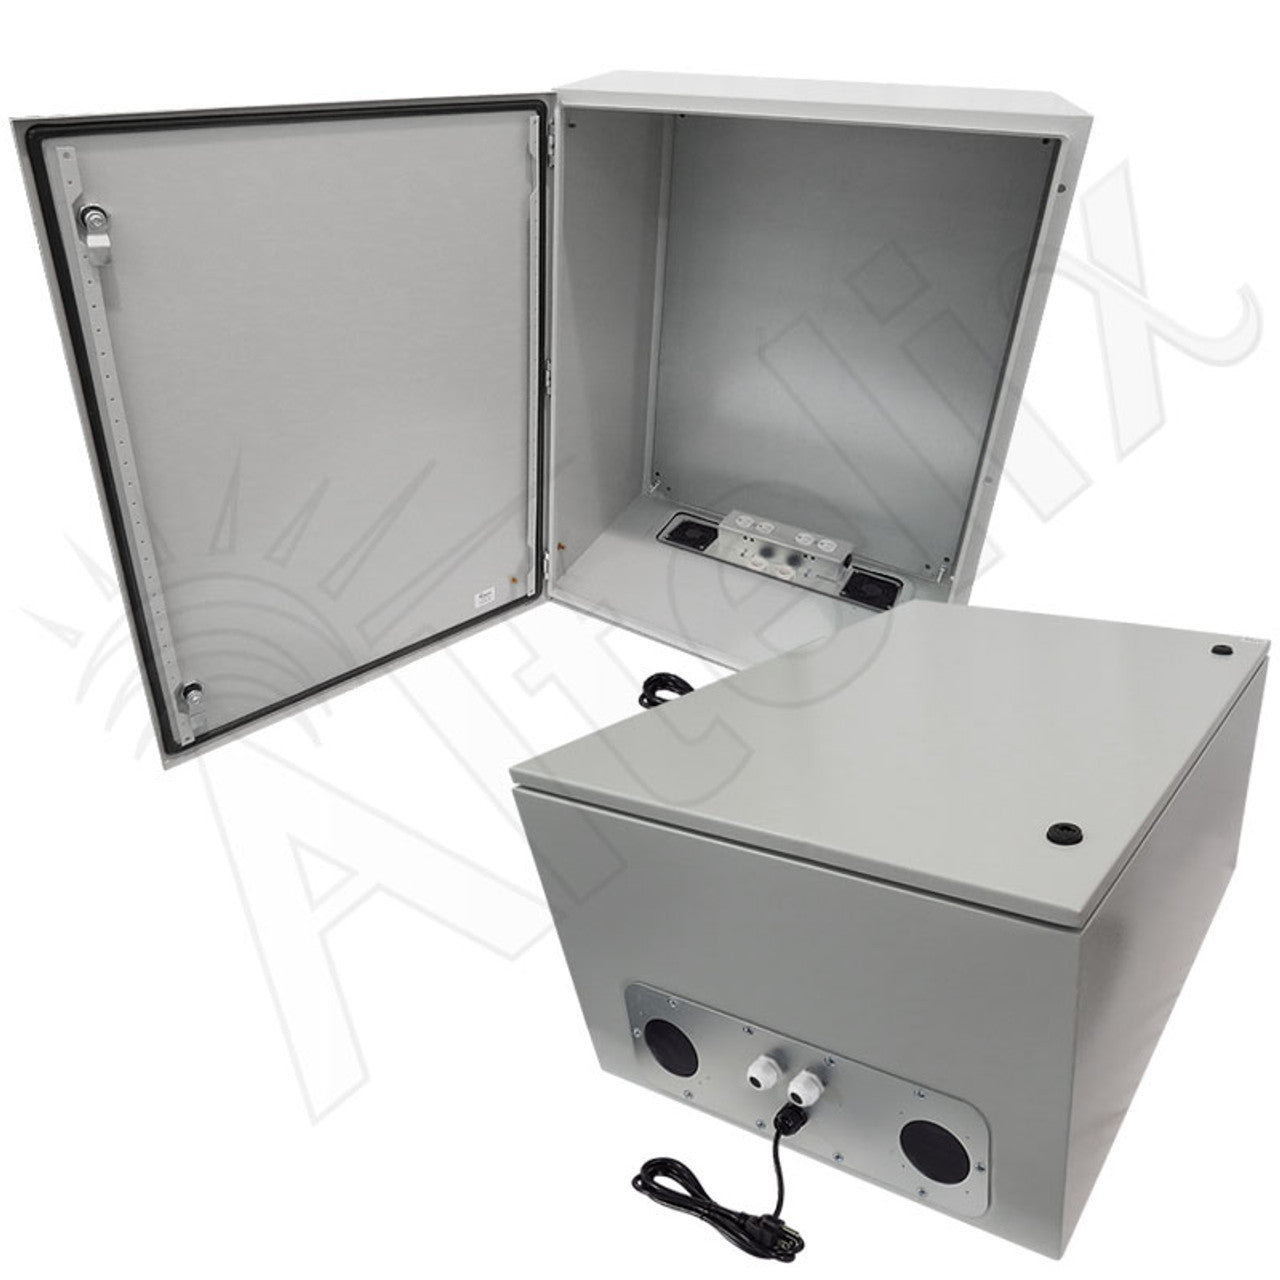 Altelix Steel Weatherproof NEMA Enclosure with Dual 120 VAC Duplex Outlets and Power Cord-11